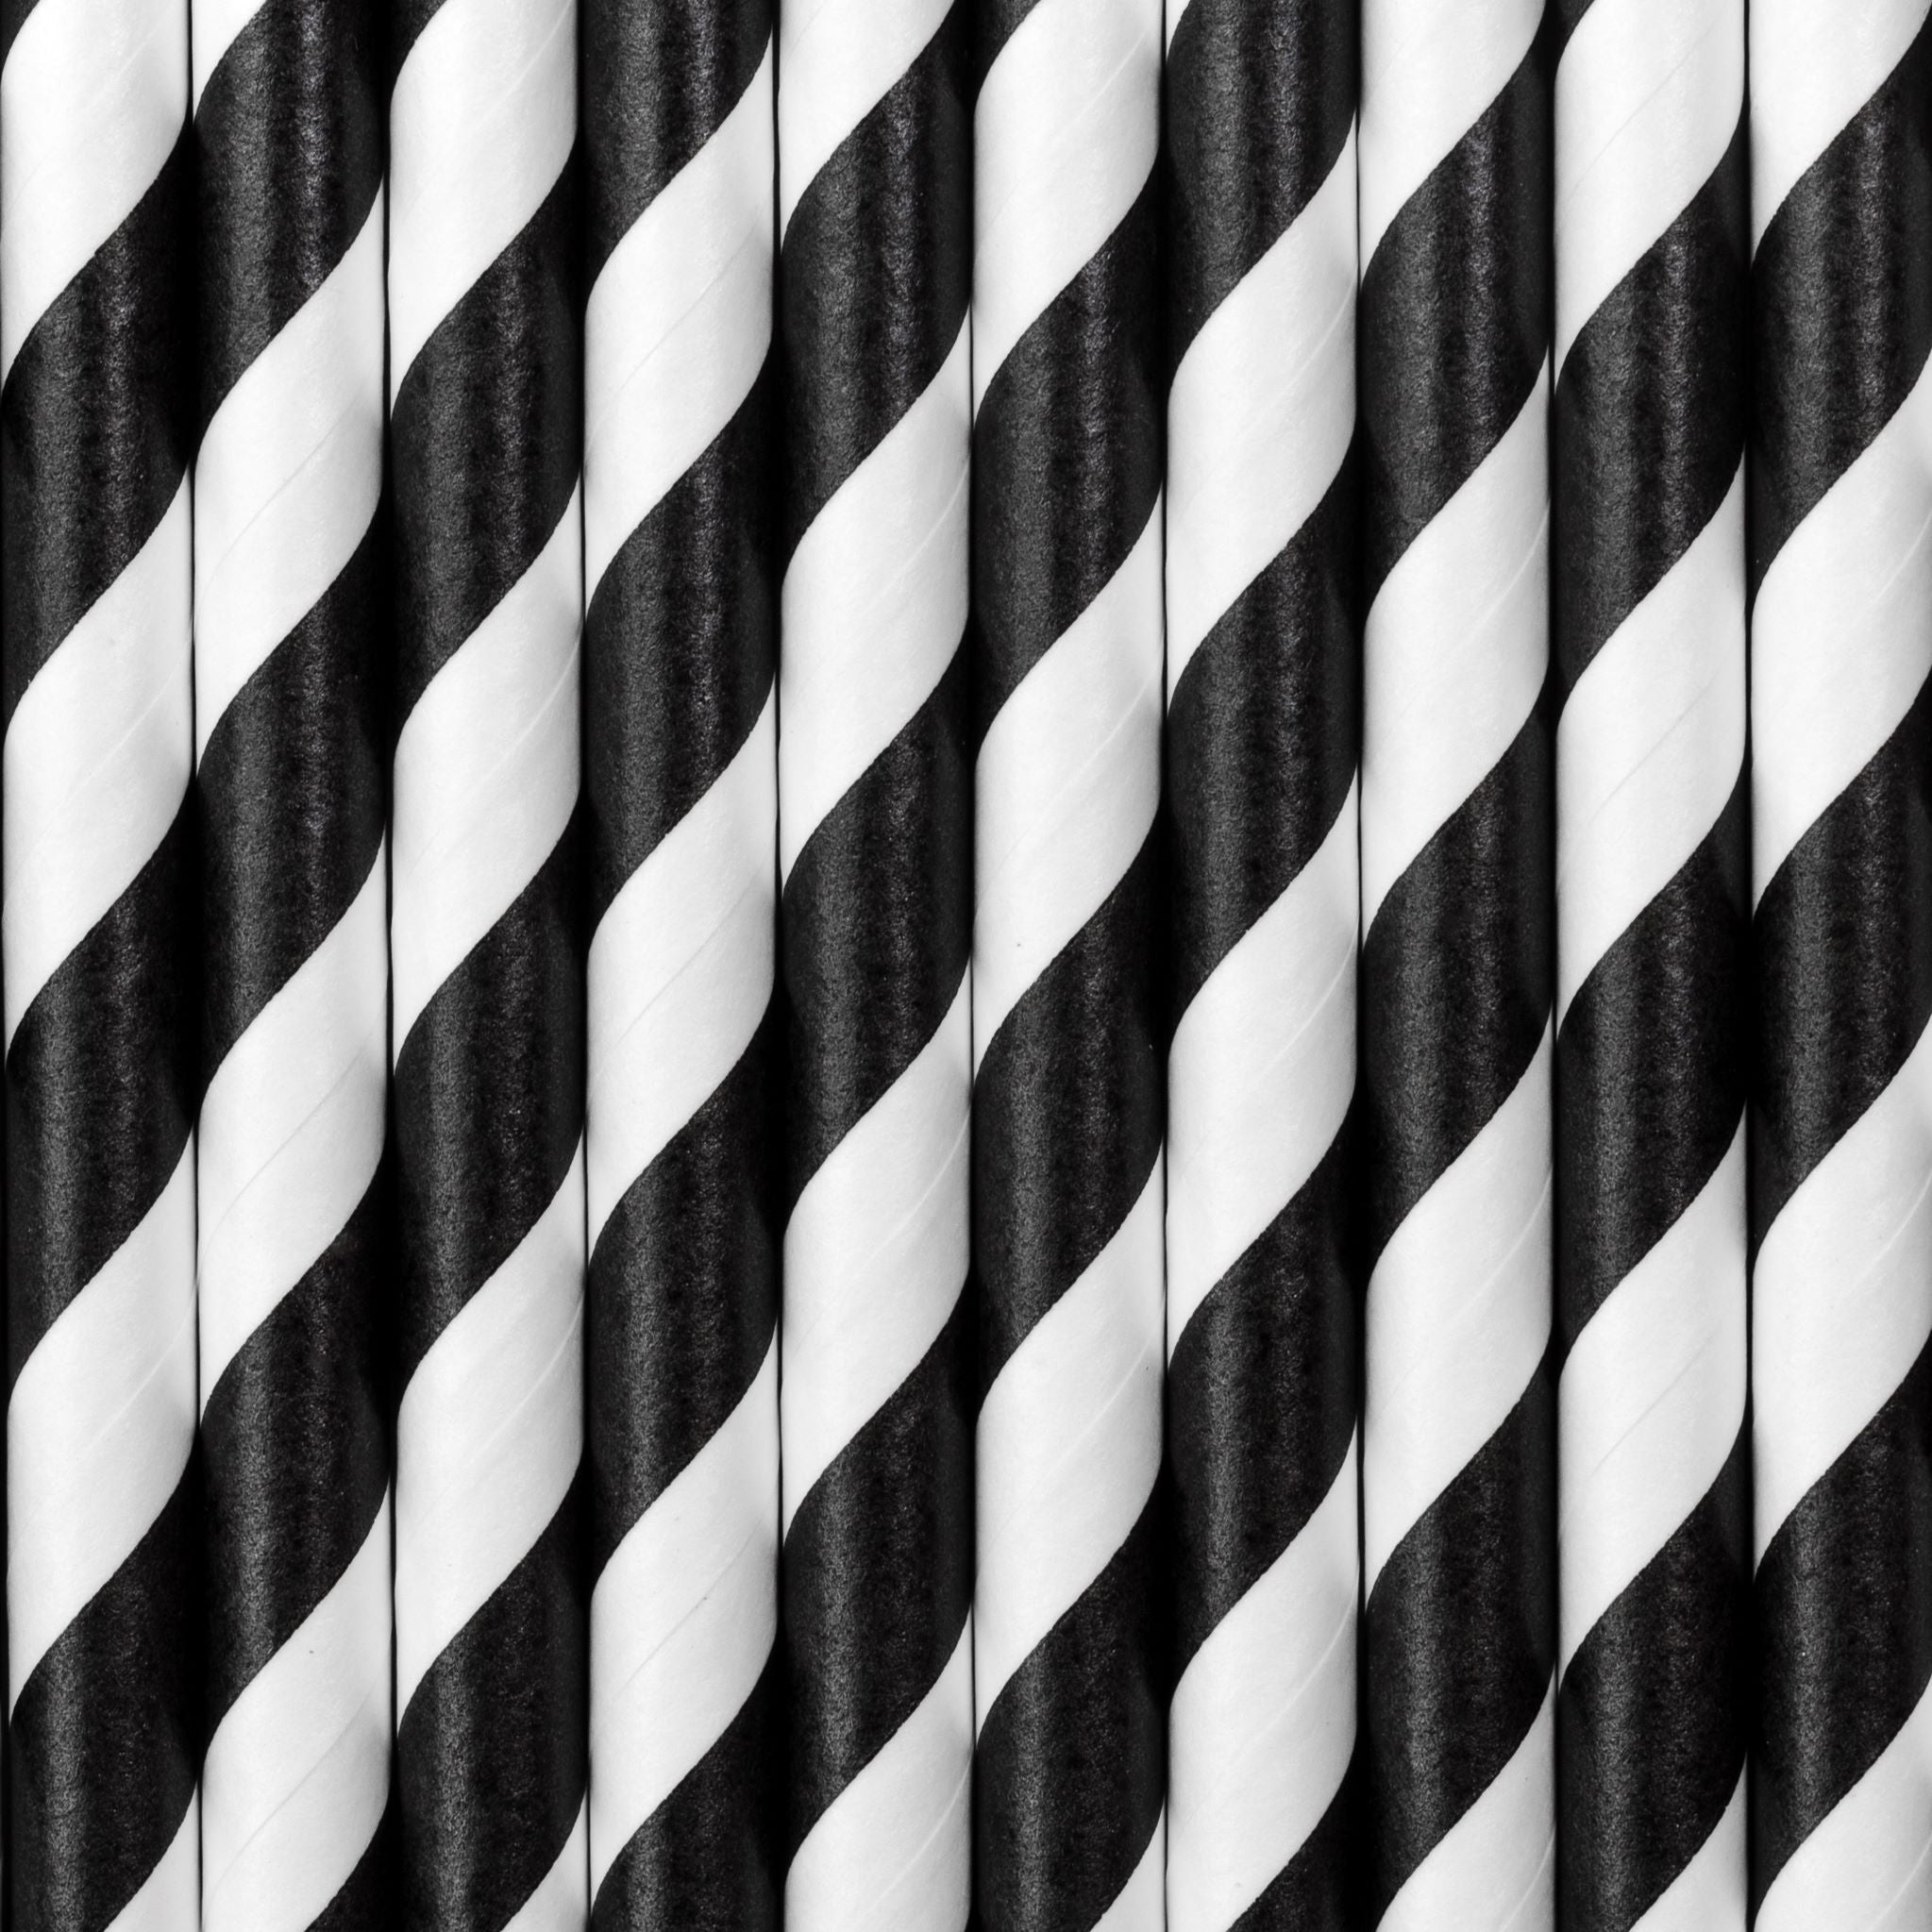 Paper Straws Black and White Pack of 250